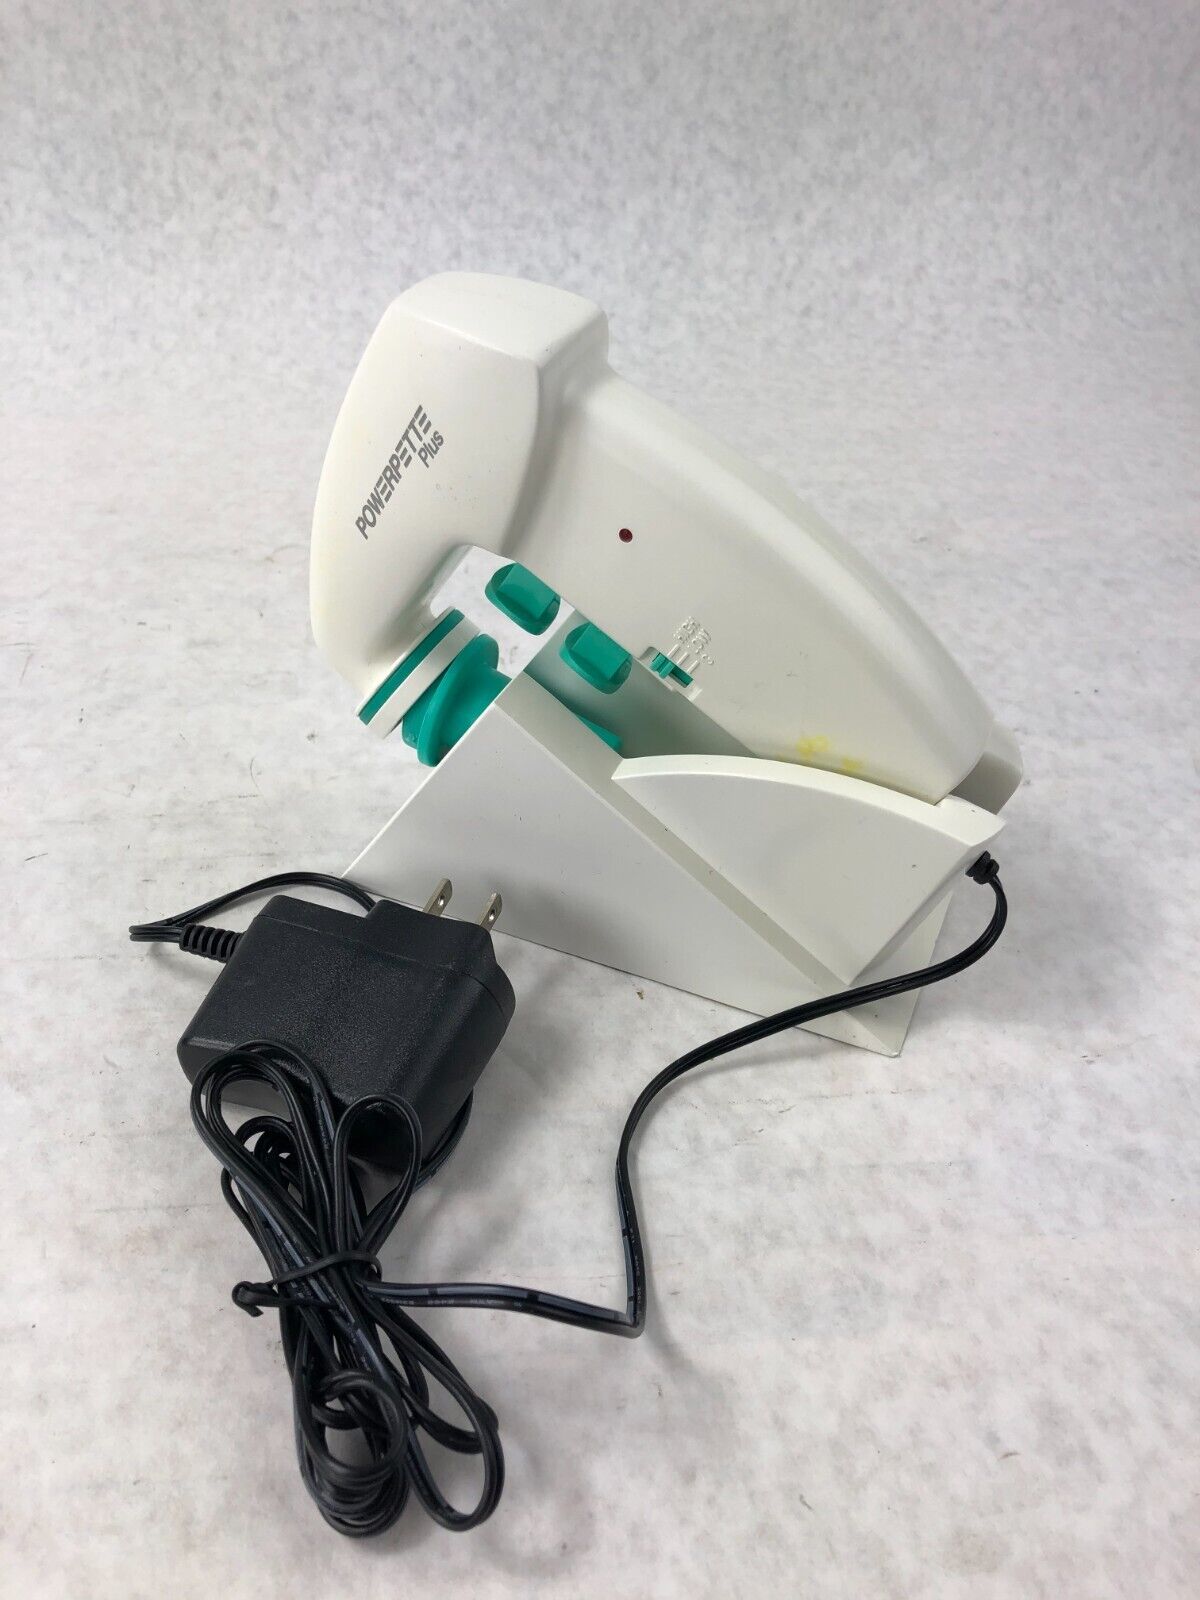 Jencons Powerpette Plus Electronic Pipette w/ Power Adapter and Stand